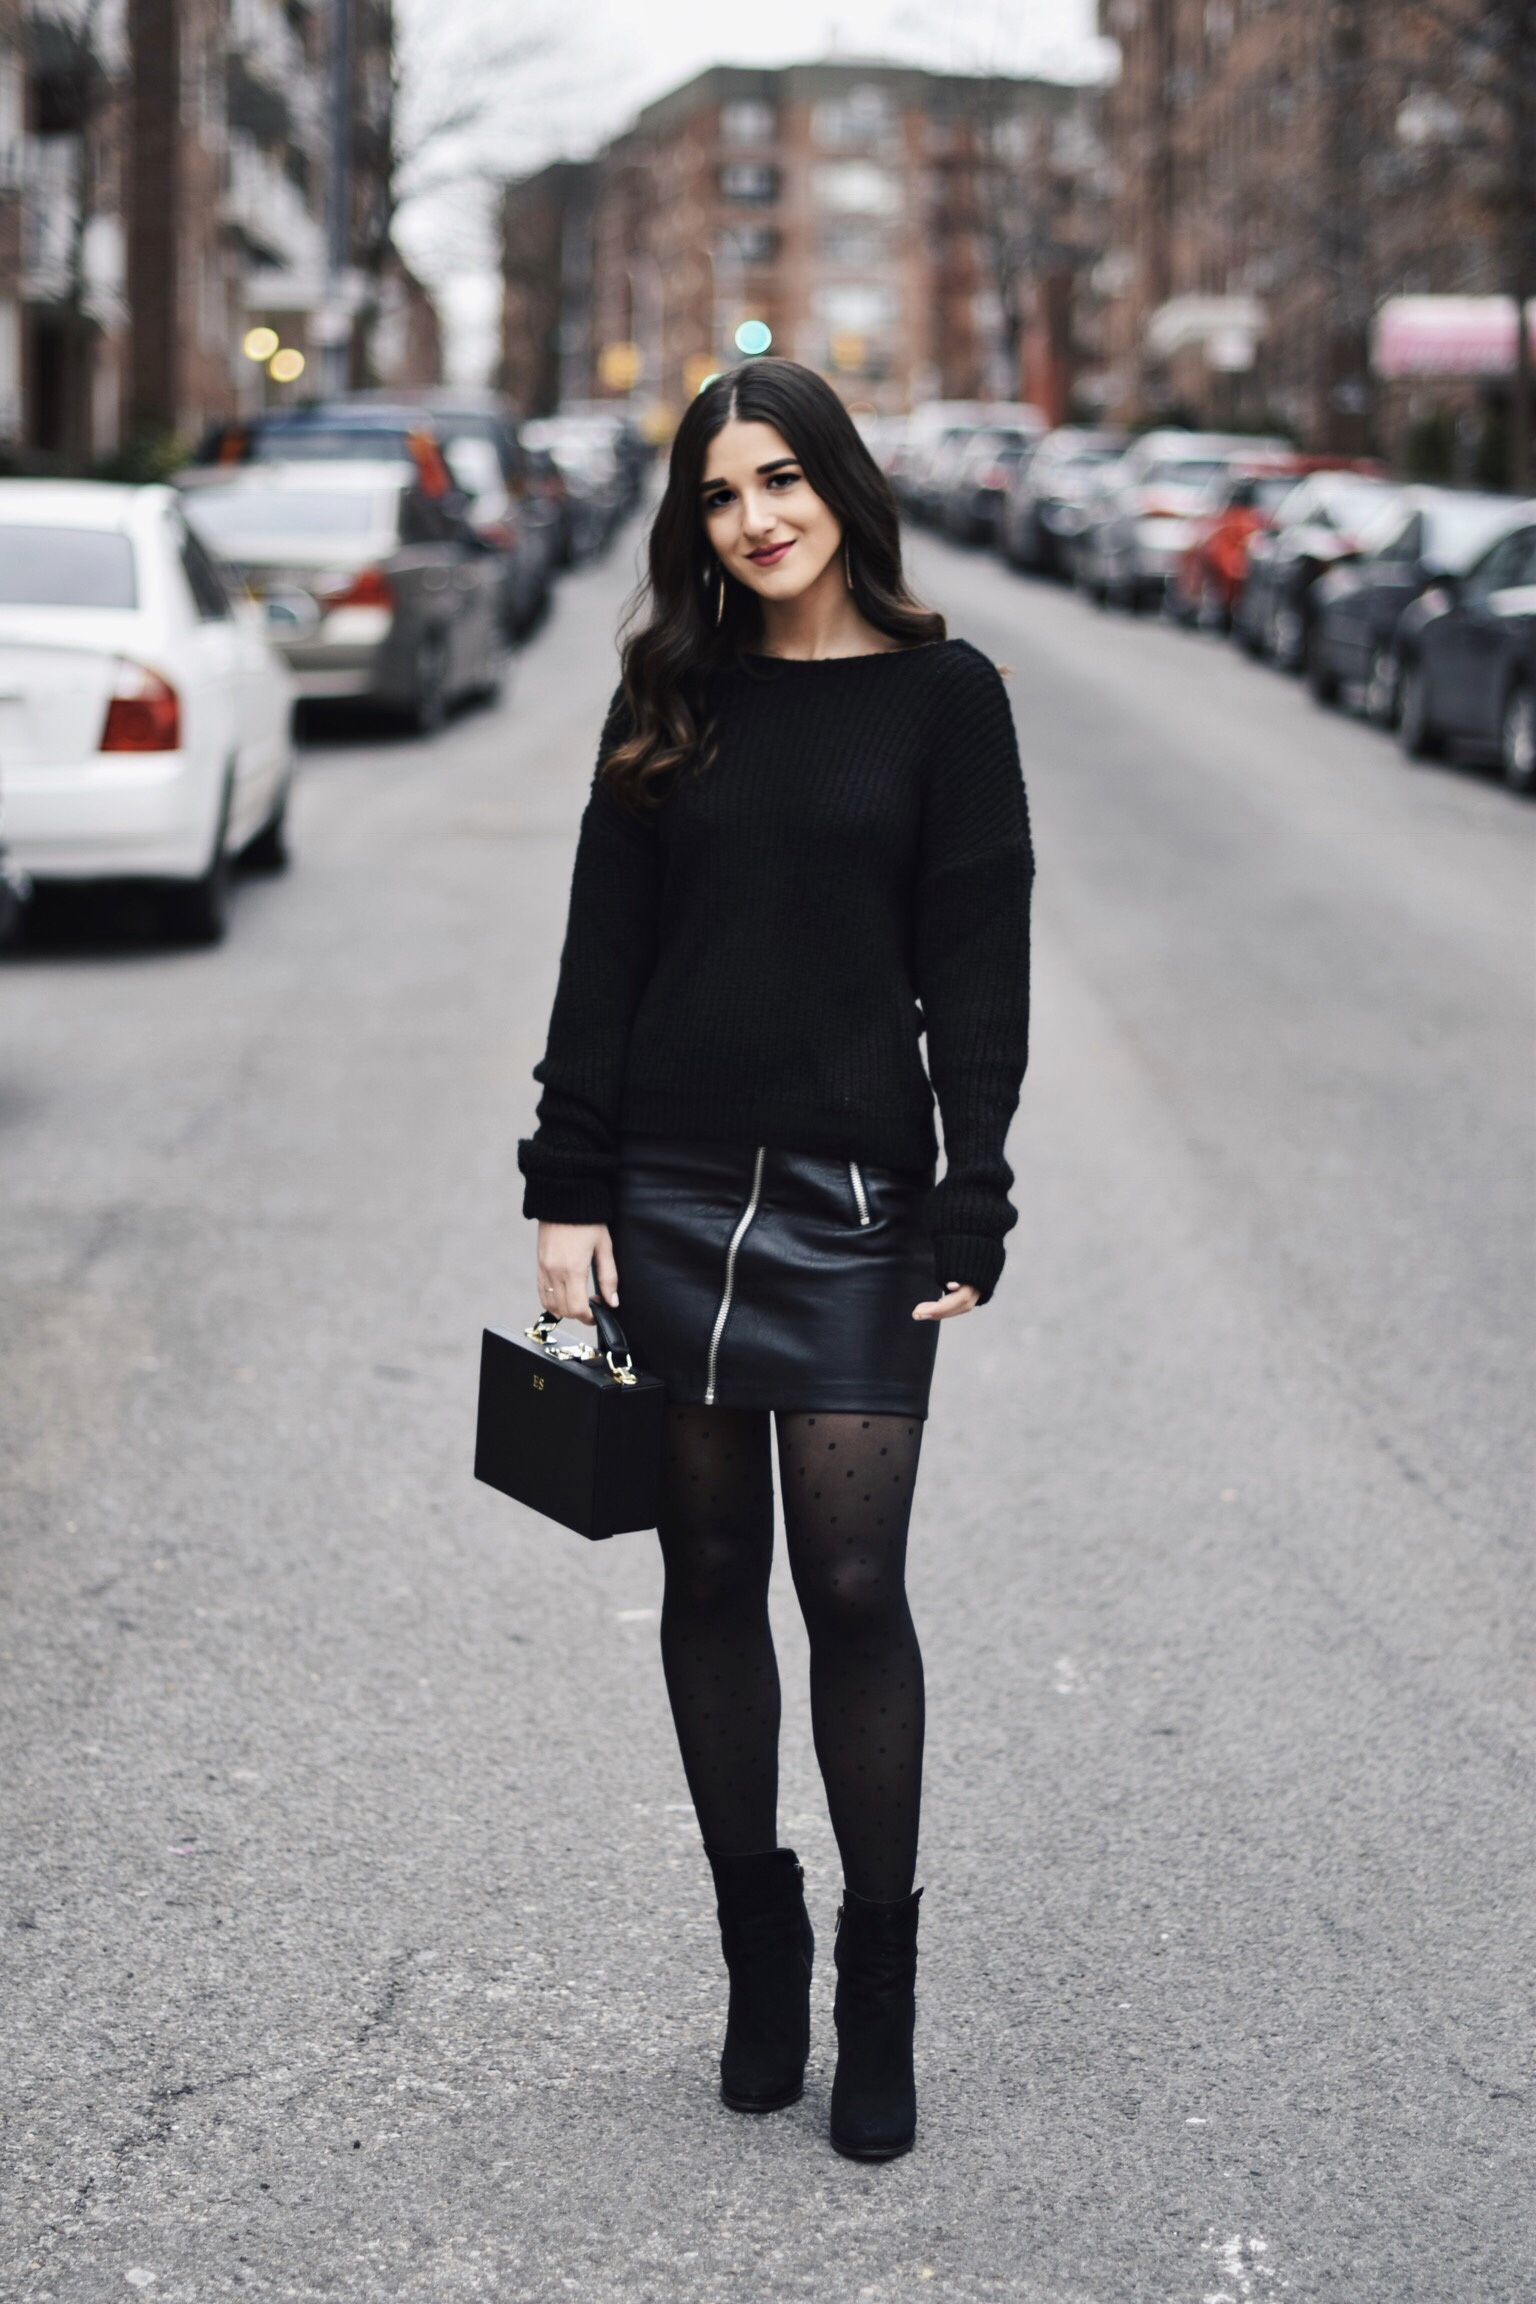 All Black Look 5 Ways To Keep Your New Year's Resolution Going Strong Esther Santer Fashion Blog NYC Street Style Blogger Outfit OOTD Trendy BaubleBar Earrings Monogrammed Box Bag Daily Edited Girl  Women Booties Pleather Mini Skirt Polka Dot Tights.jpg